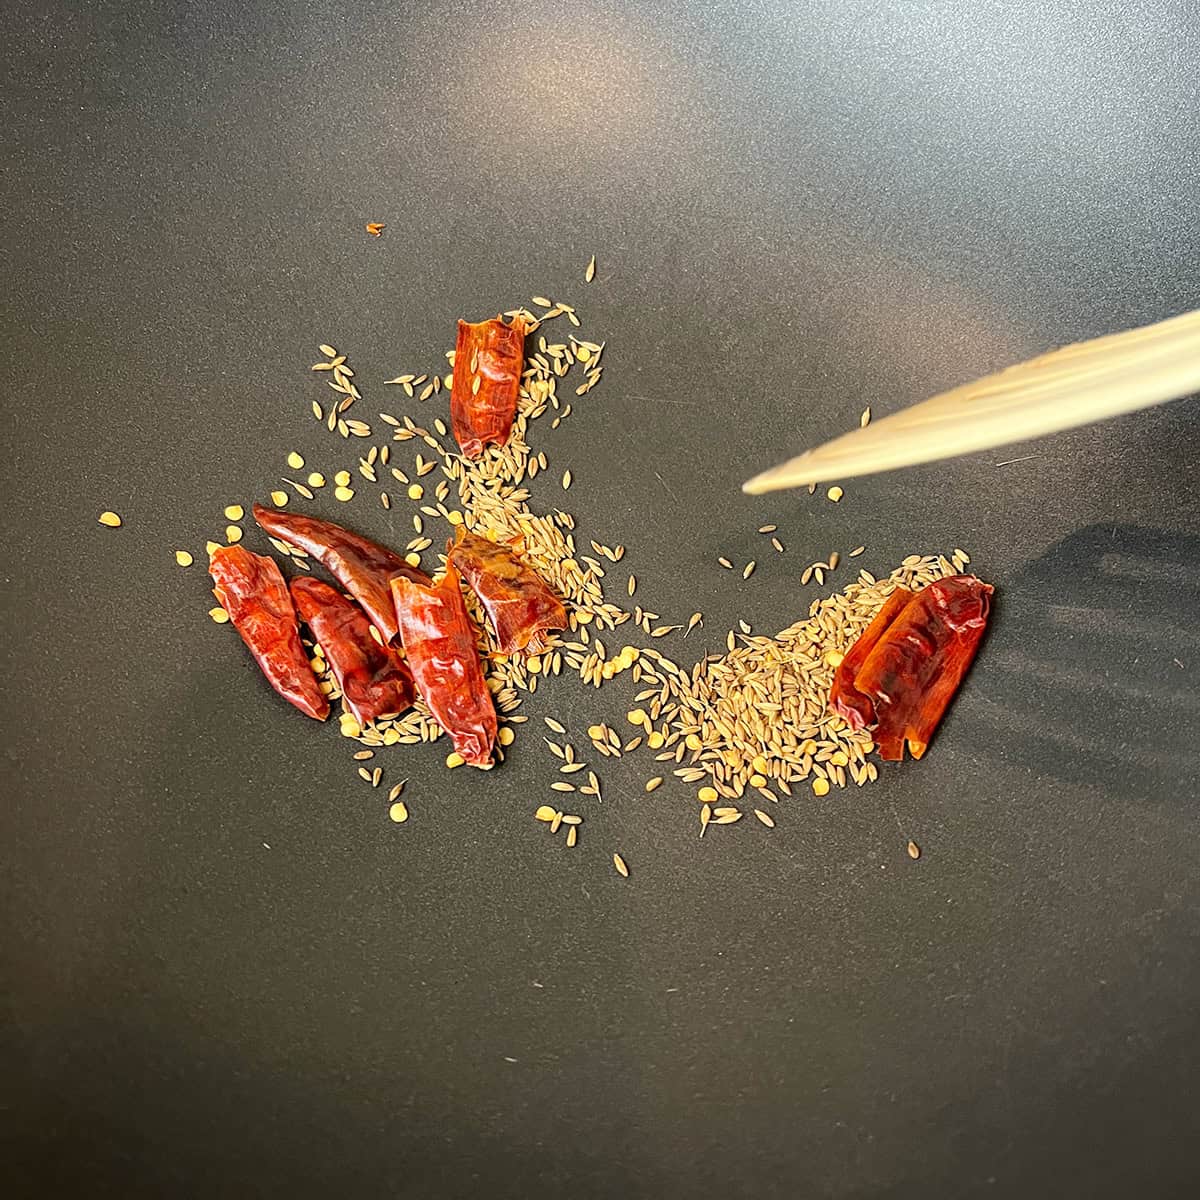 Cumin seeds and dry red chili peppers are being dry roasted in a nonstick pan.